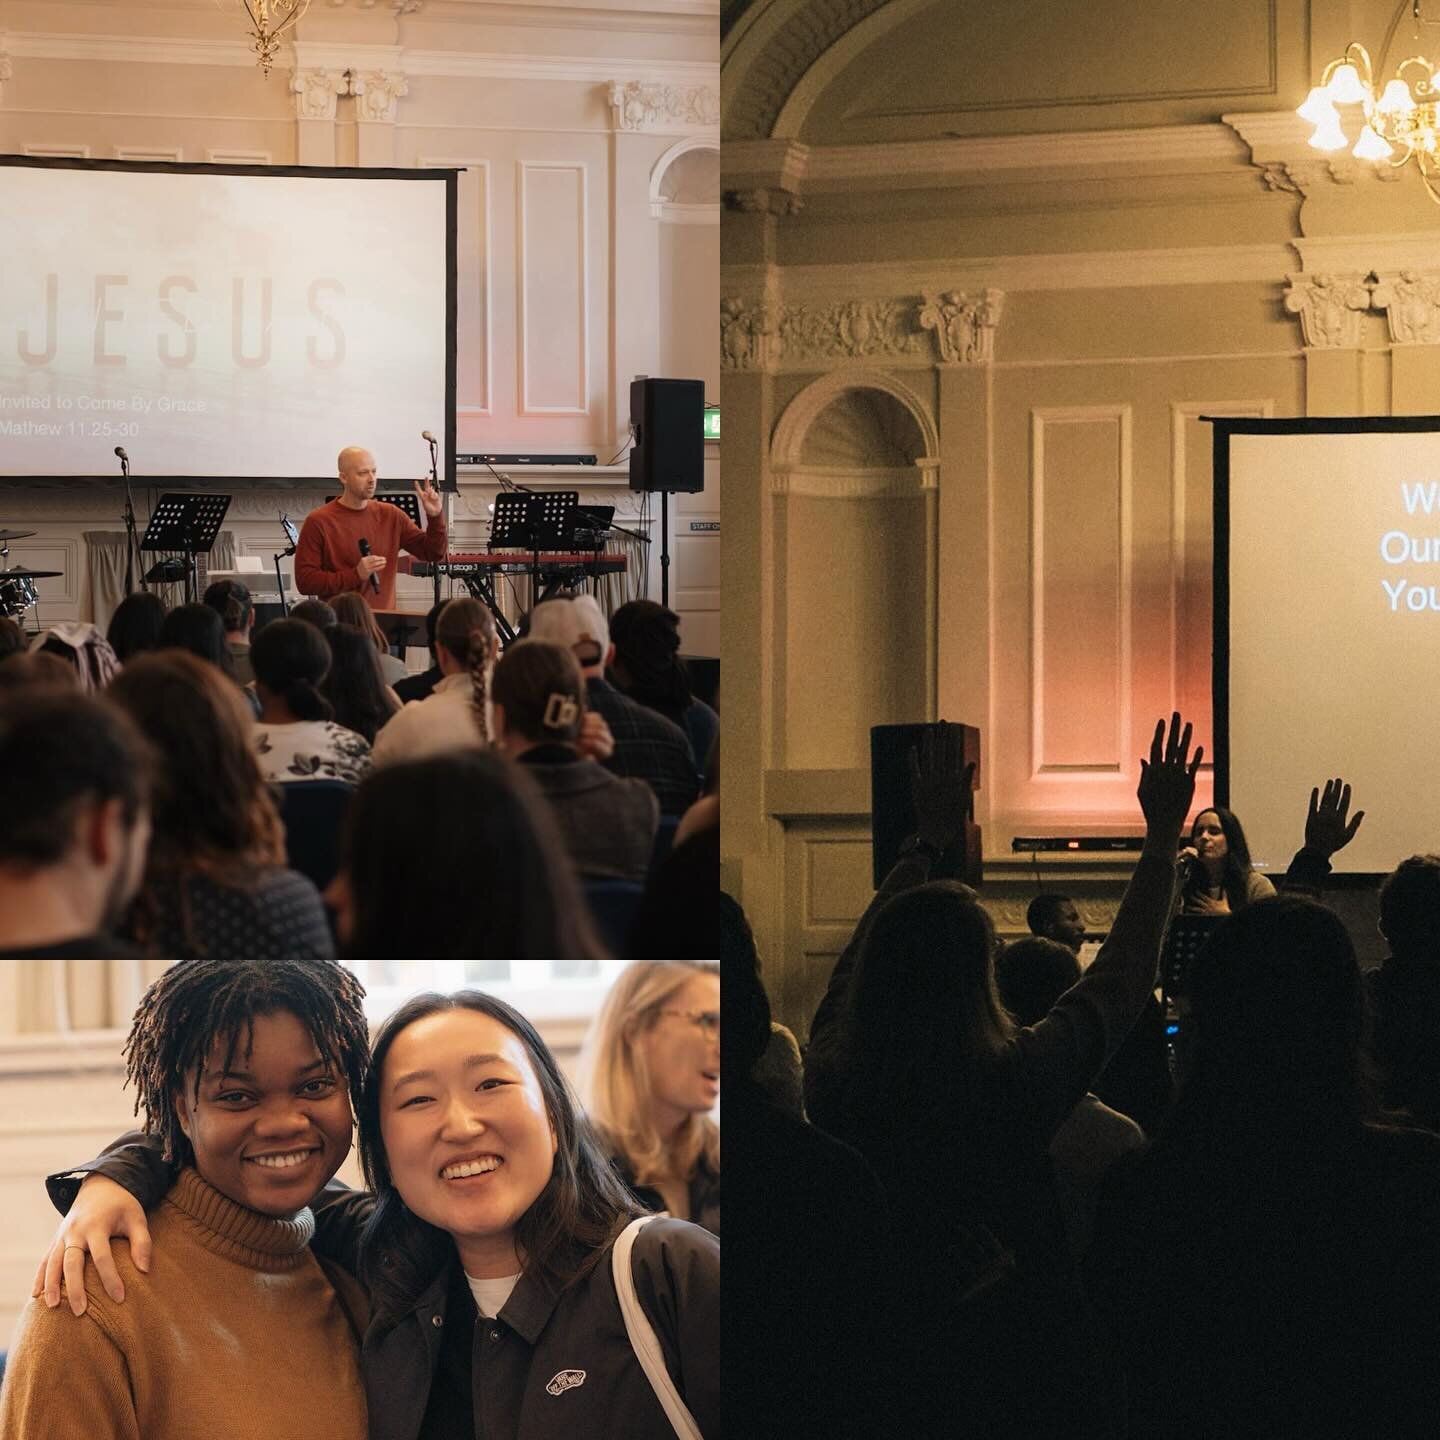 Stoneway is a church for students, young professionals, and families! We meet at the Reading Town Hall every Sunday at 10:30 a.m. 

We have free sausage rolls, doughnuts, coffee, and tea, followed by worship and teaching. 

We would love to have you 